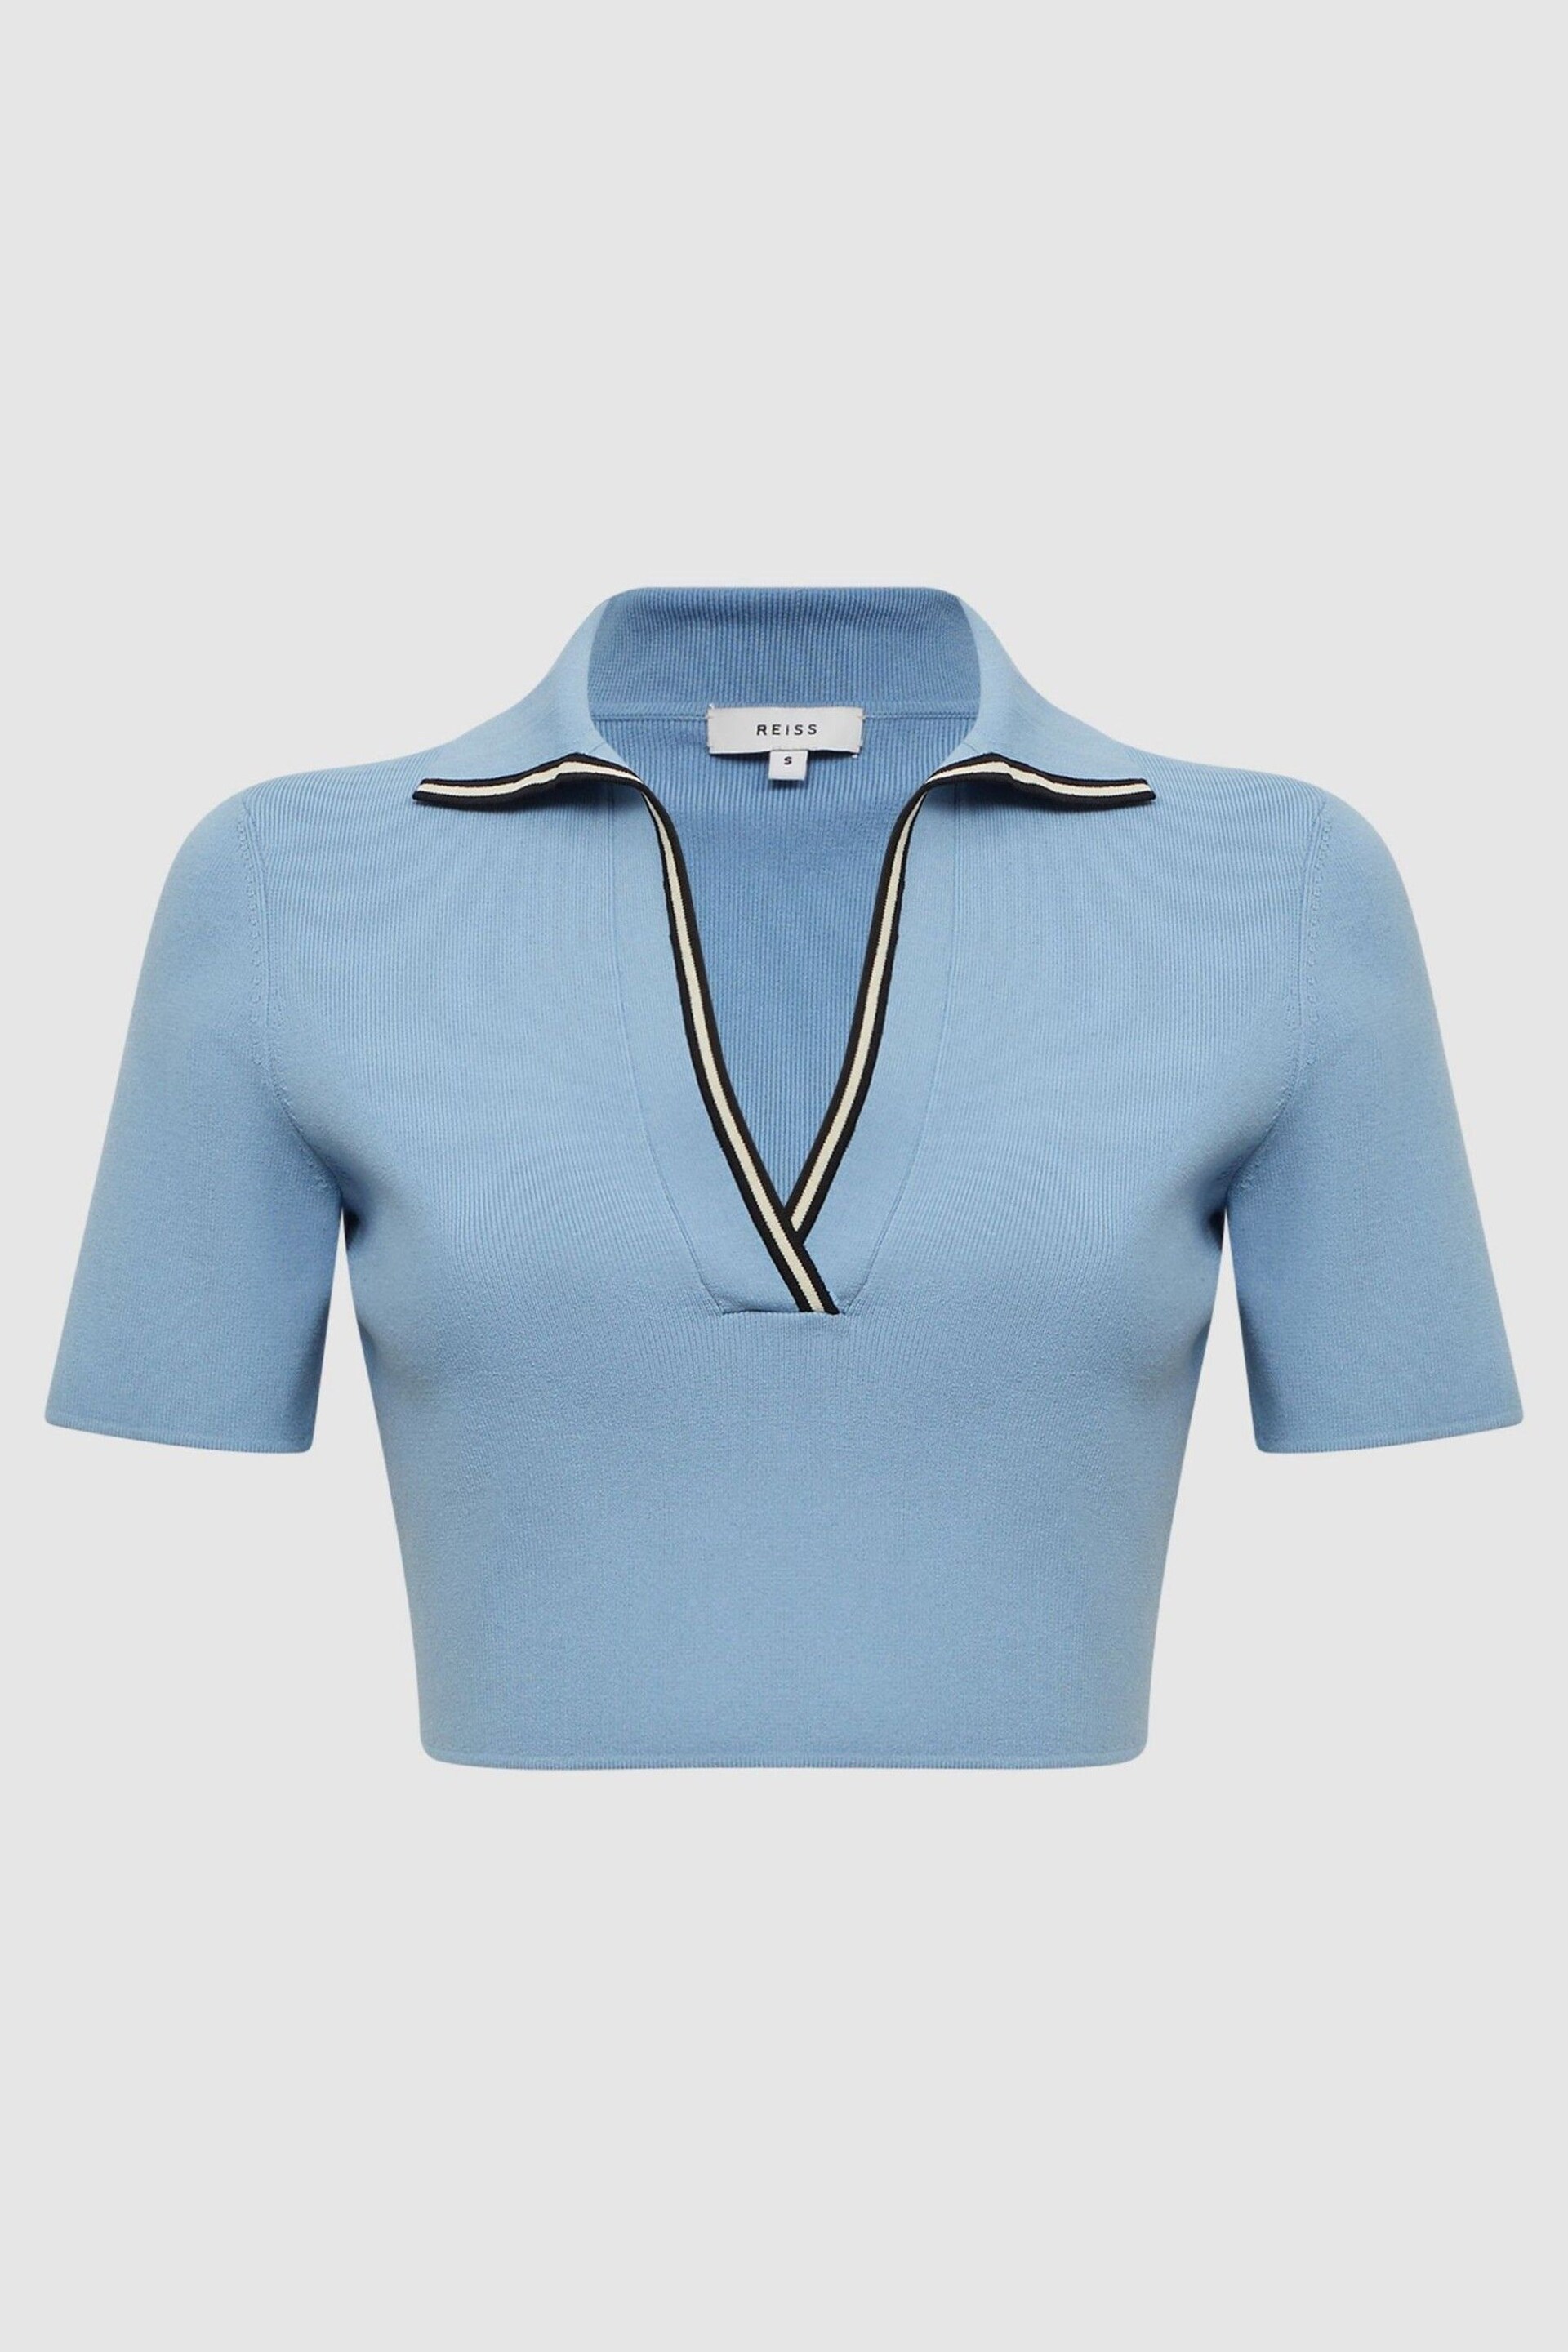 Reiss Blue Brooke Cropped Polo Shirt Co-Ord - Image 2 of 5